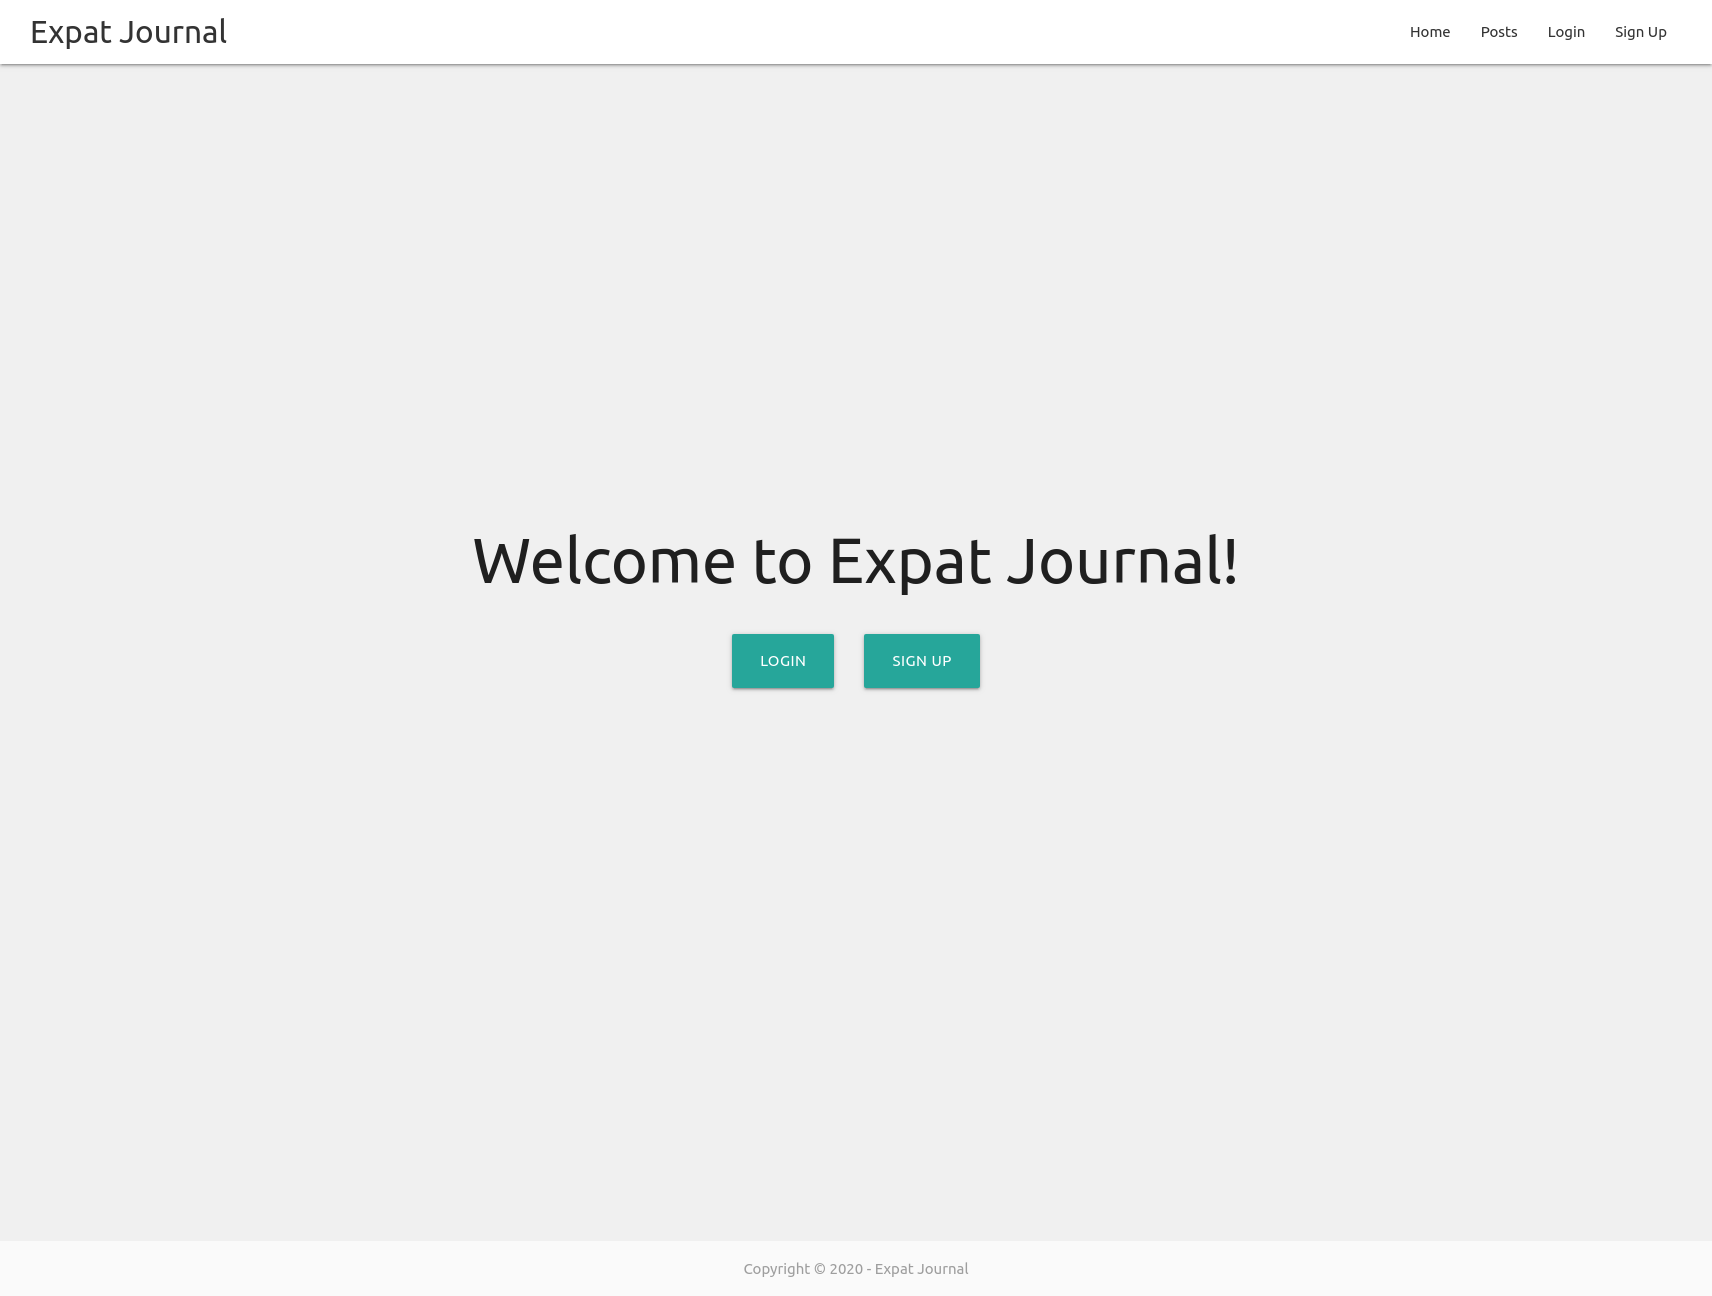 Screenshot of the Expat Journal application site.